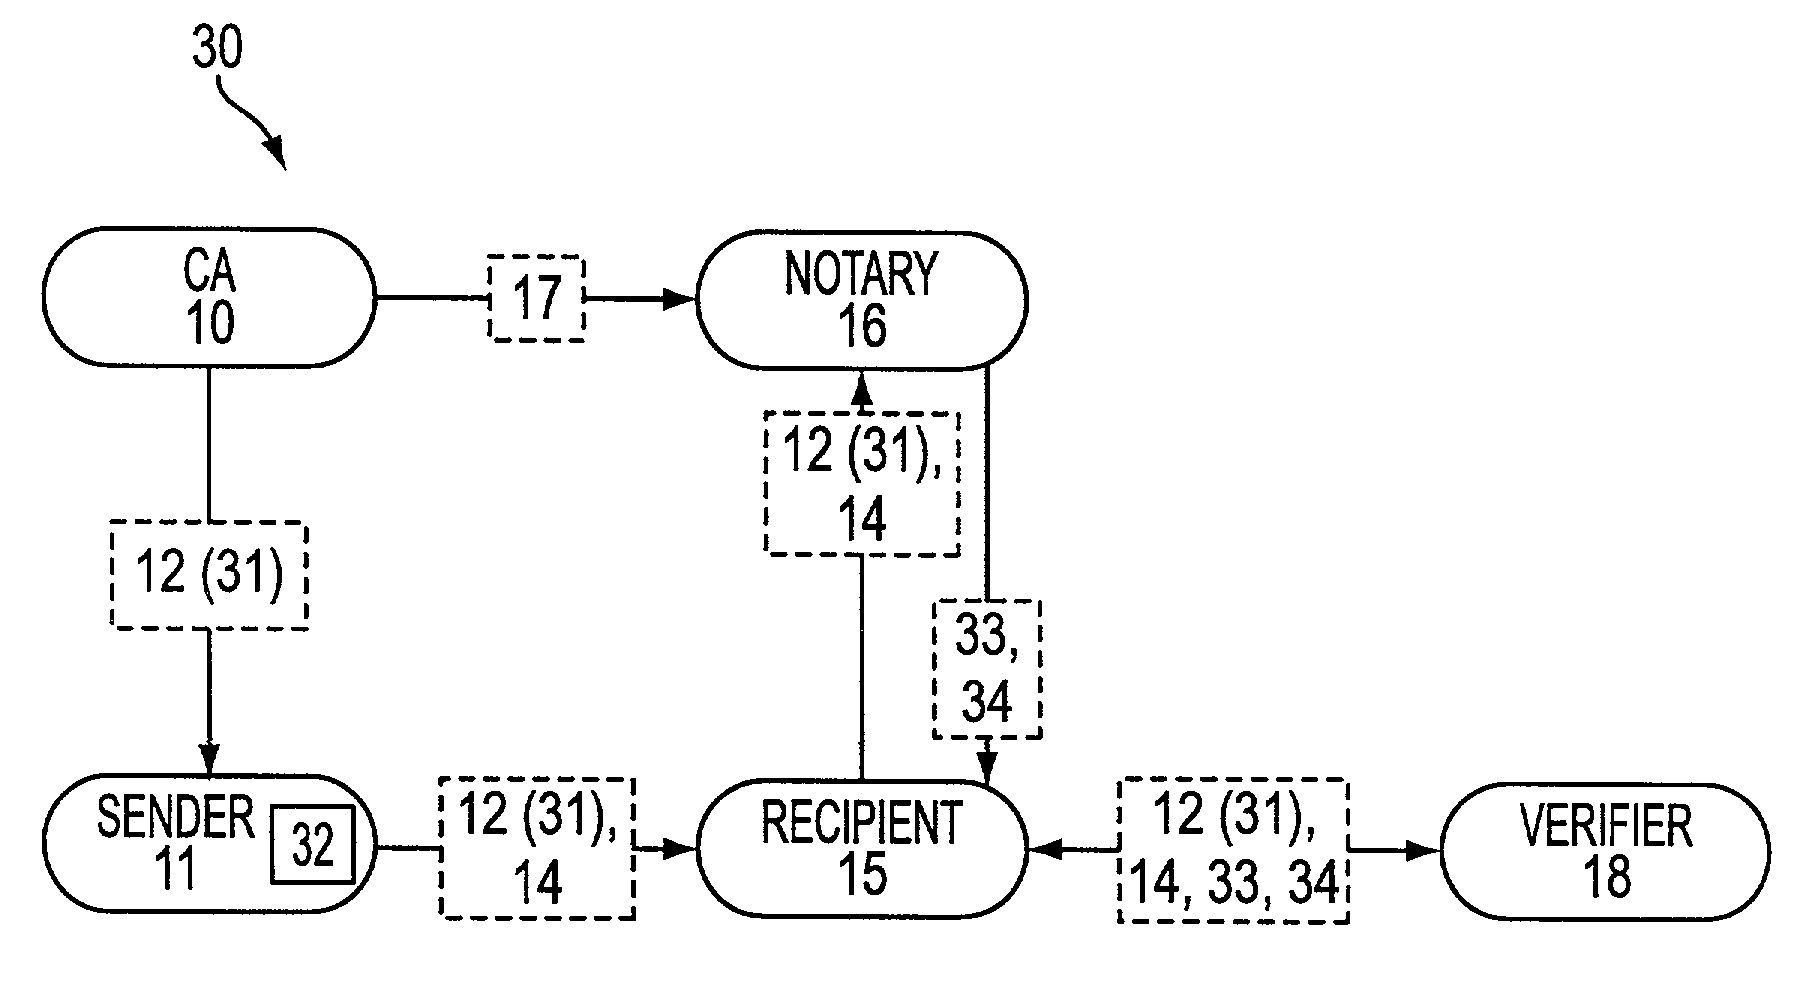 Method and apparatus for validating a digital signature